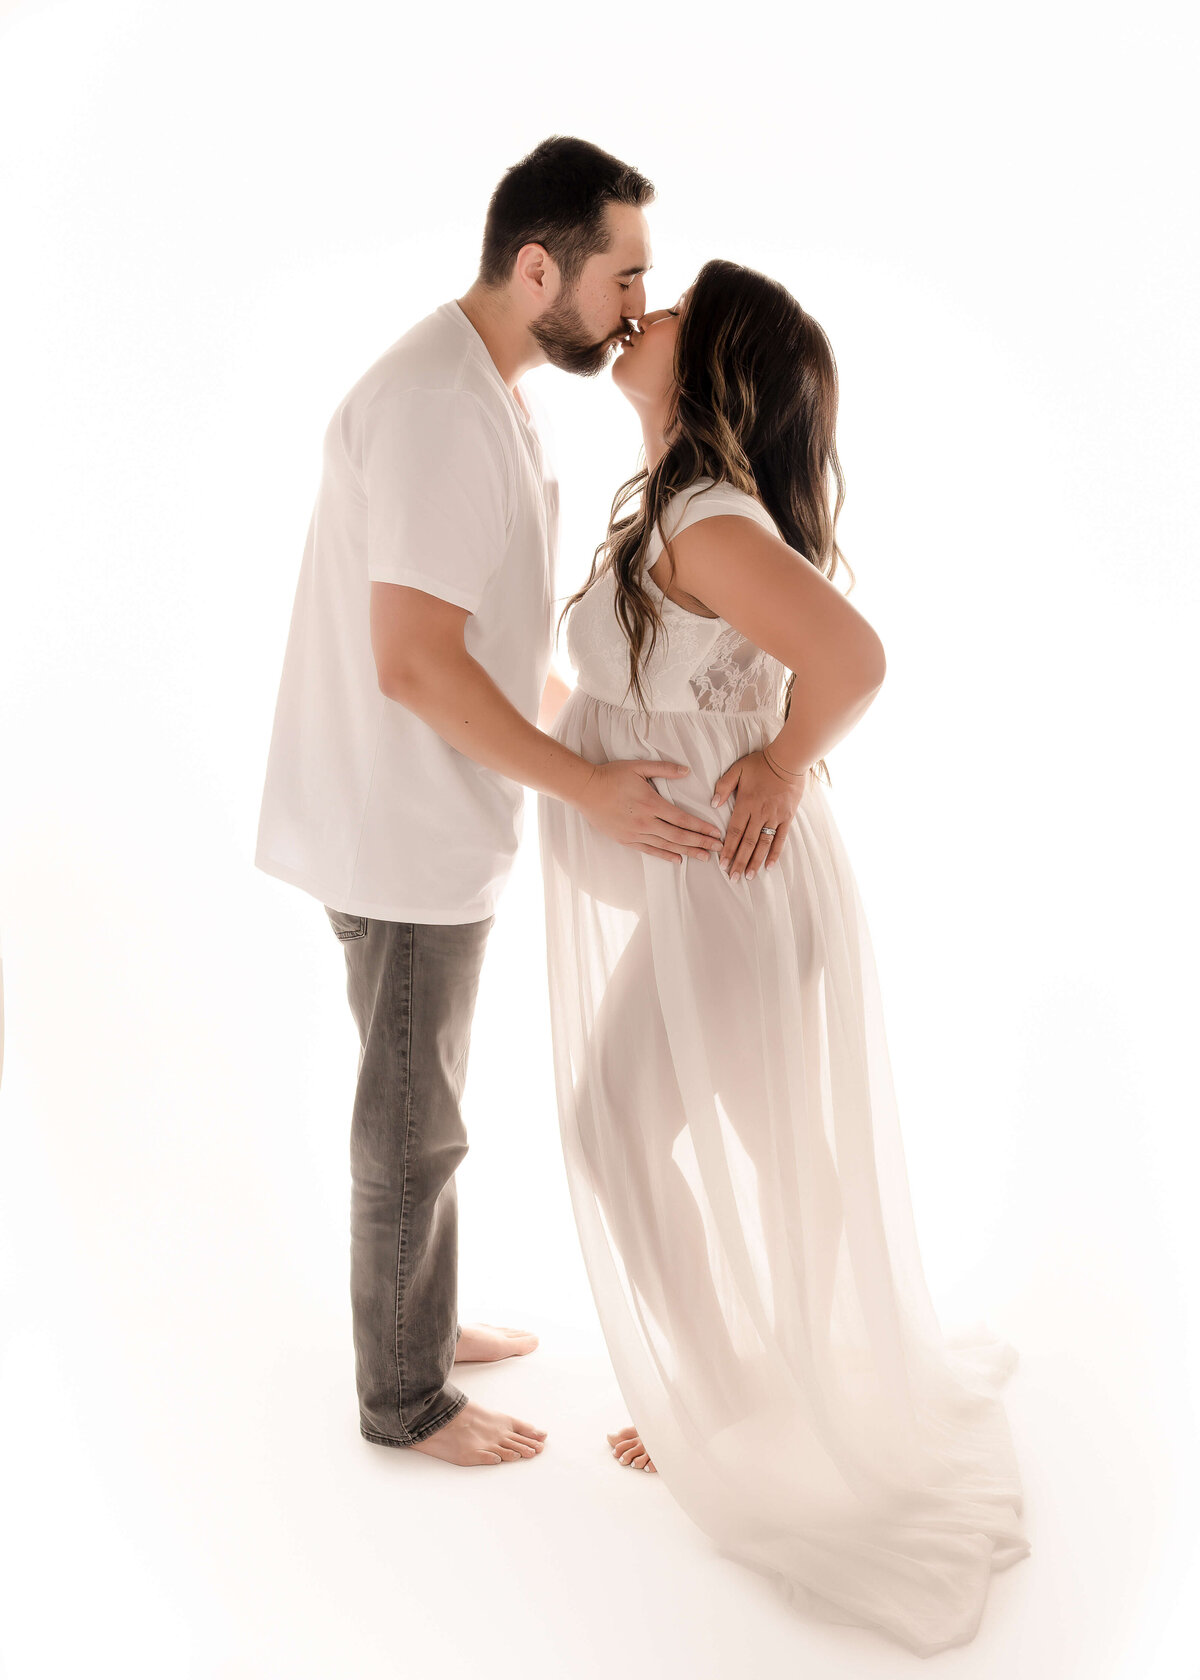 Couple embraced and kissing during in studio maternity session by Ashley Nicole.